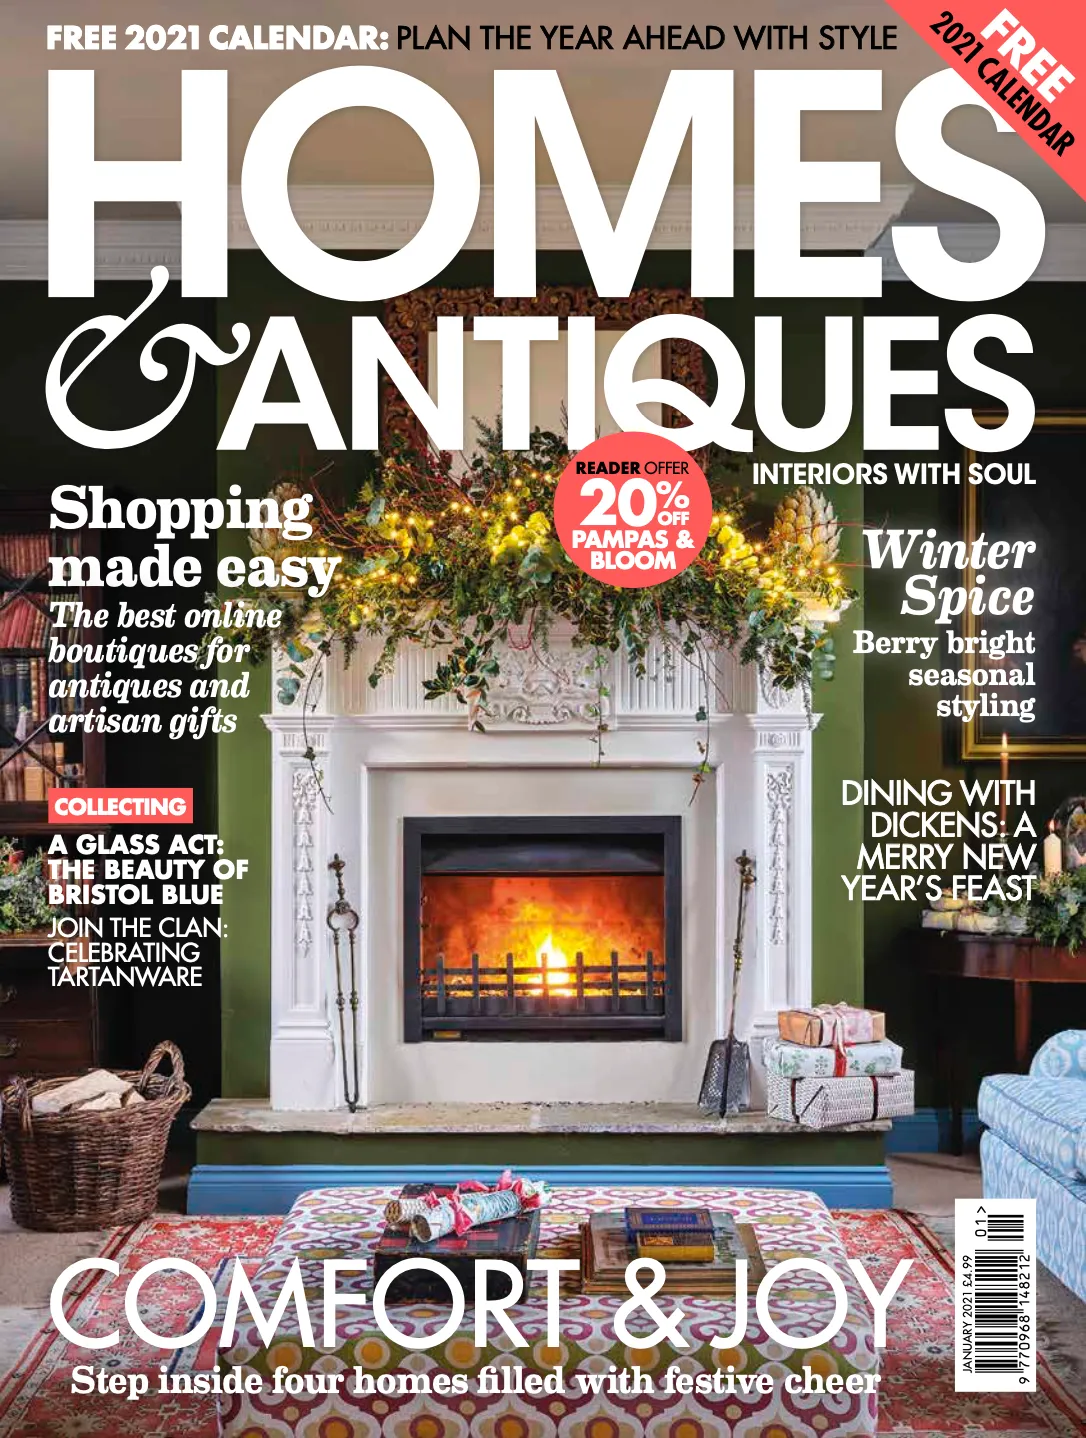 Homes & Antiques January 2021 cover